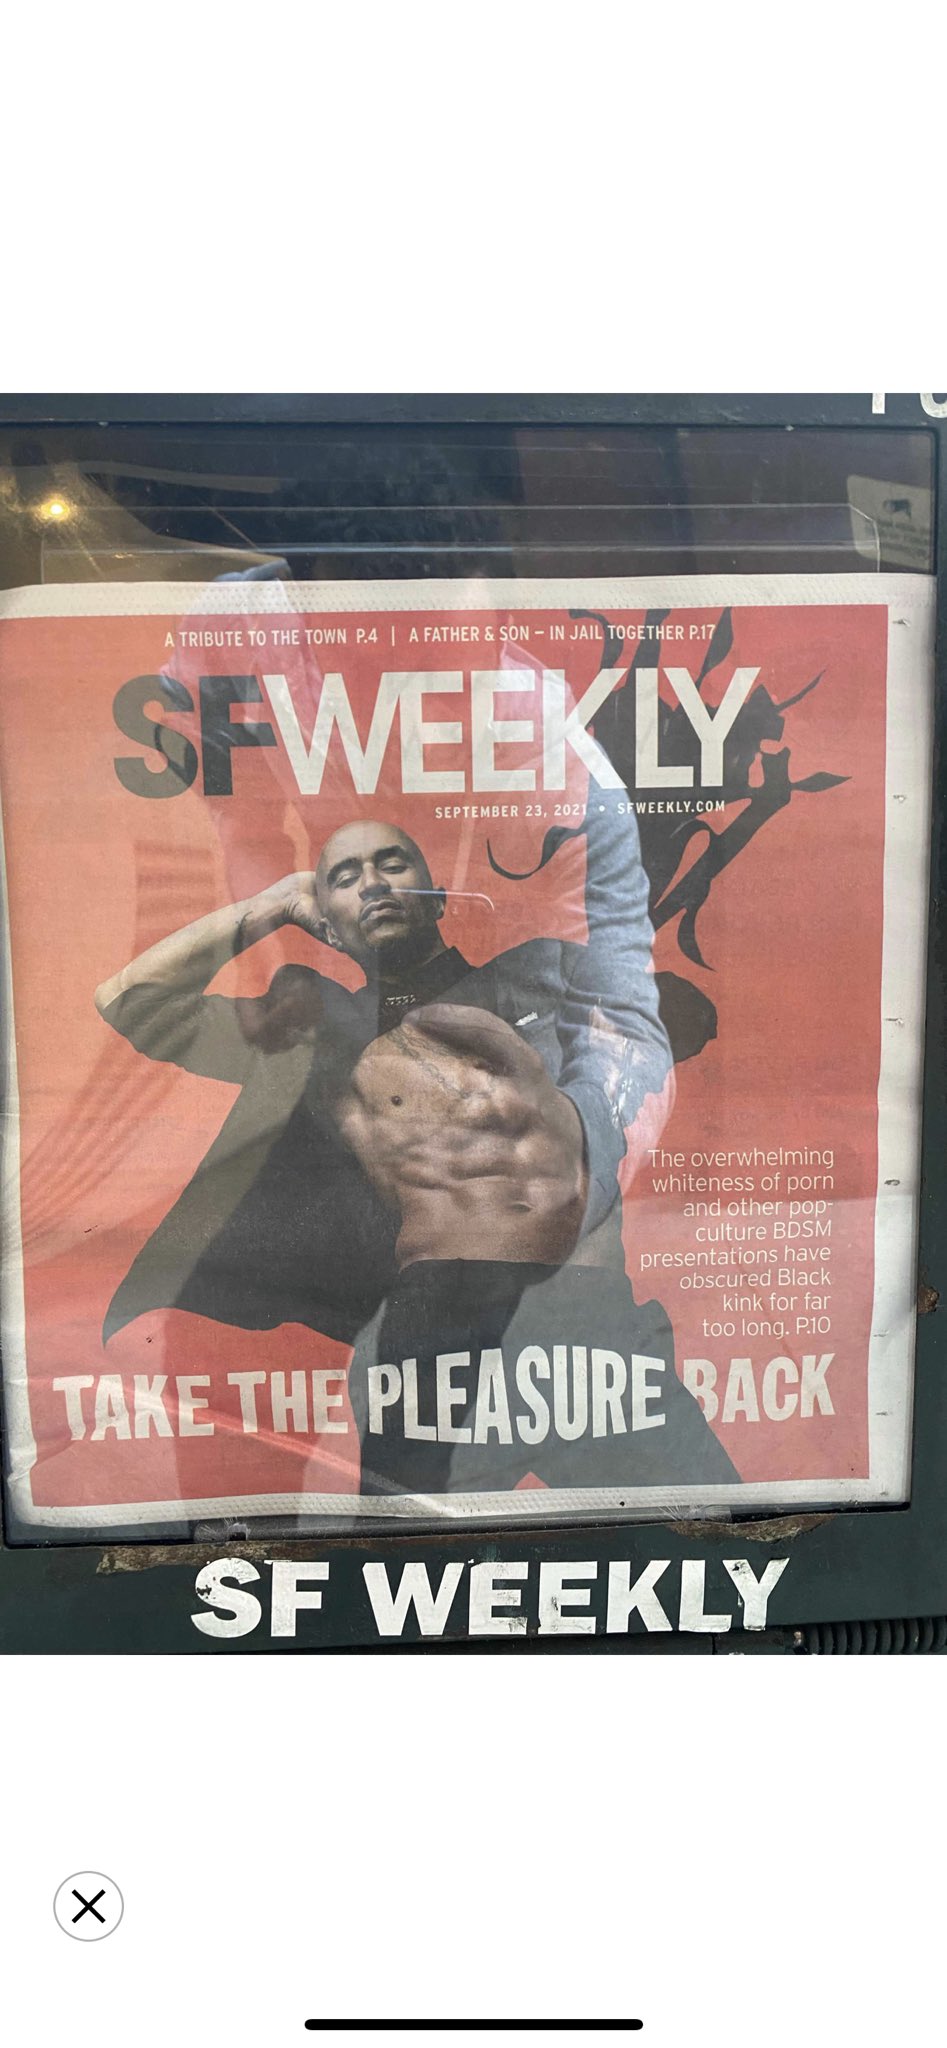 Oh shit I’m on the cover of @SFWeekly!!! 
True story by: @gurl79 photography by: @infamoustlove https://t